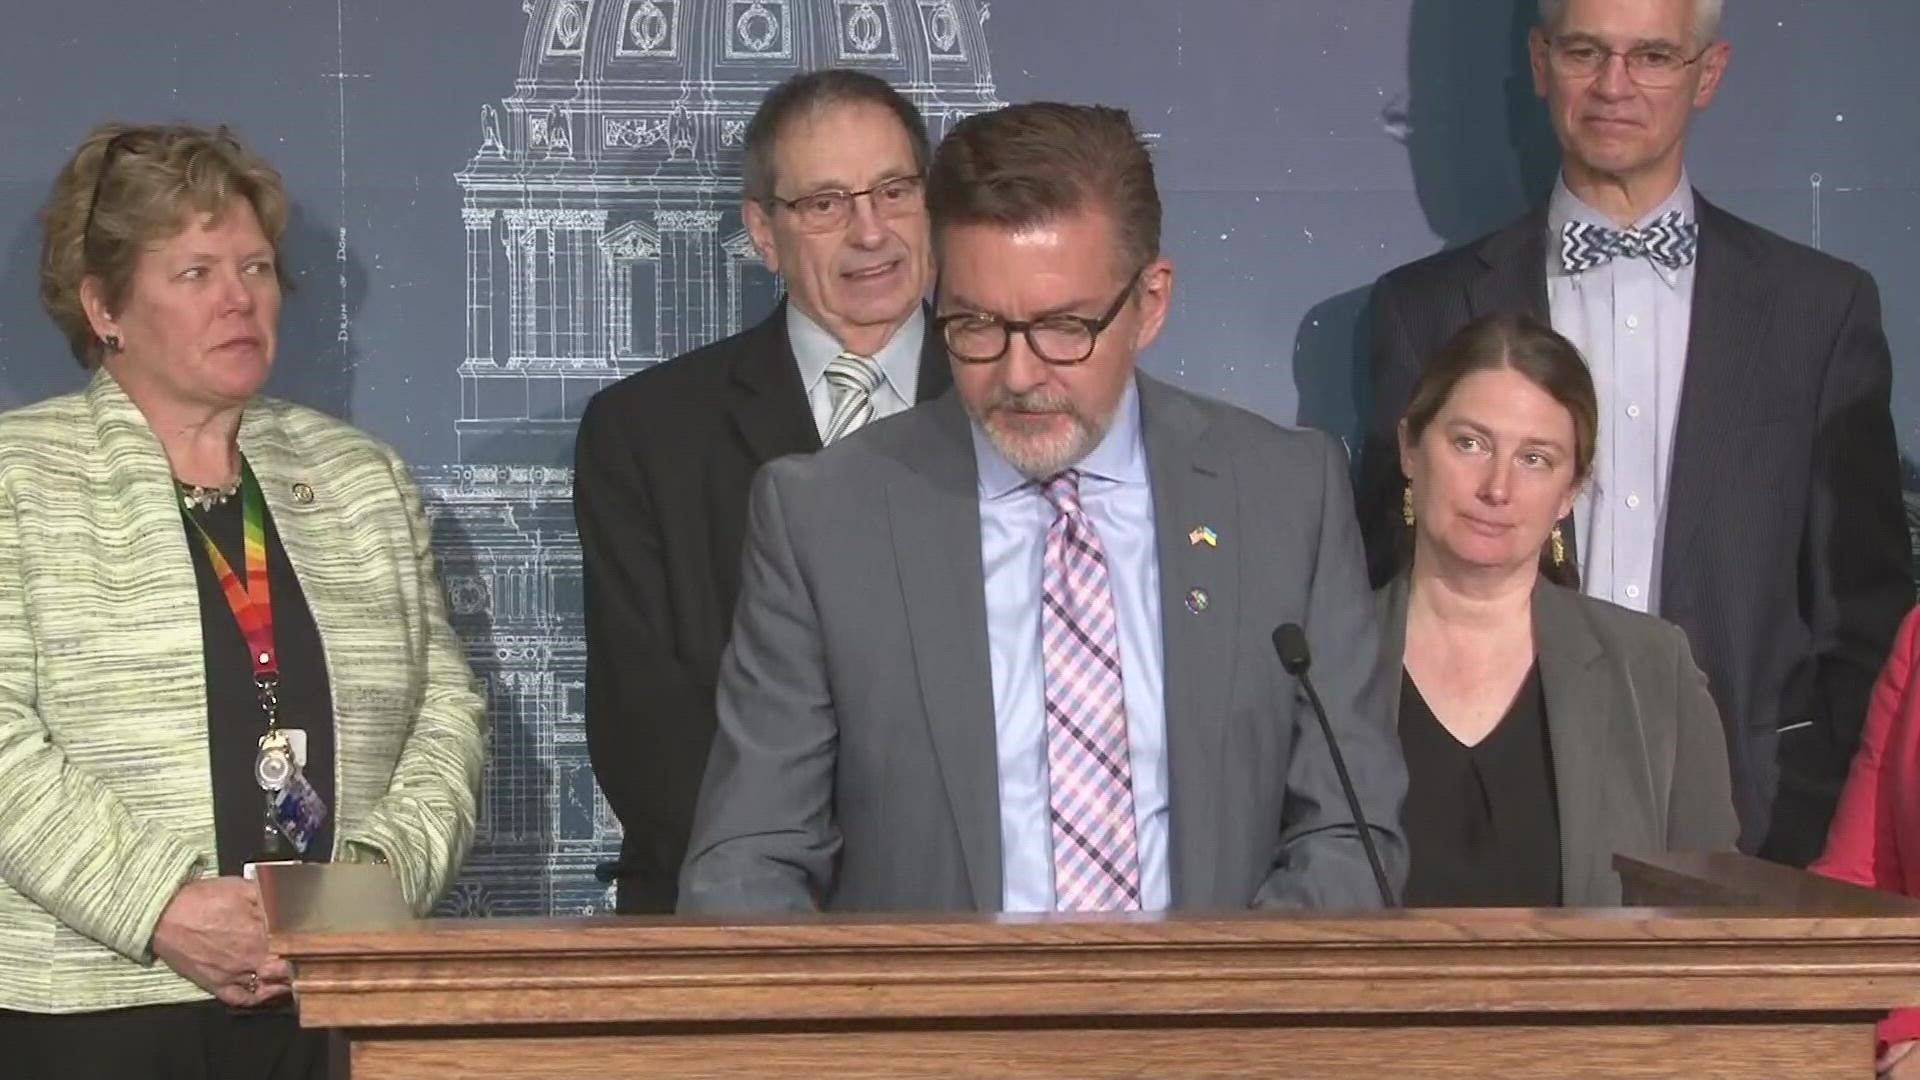 Senators Dibble, Carlson and Kent explain effort to force conversion therapy ban bill out of committee to Senate floor. It gained 34 of the 41 votes required.